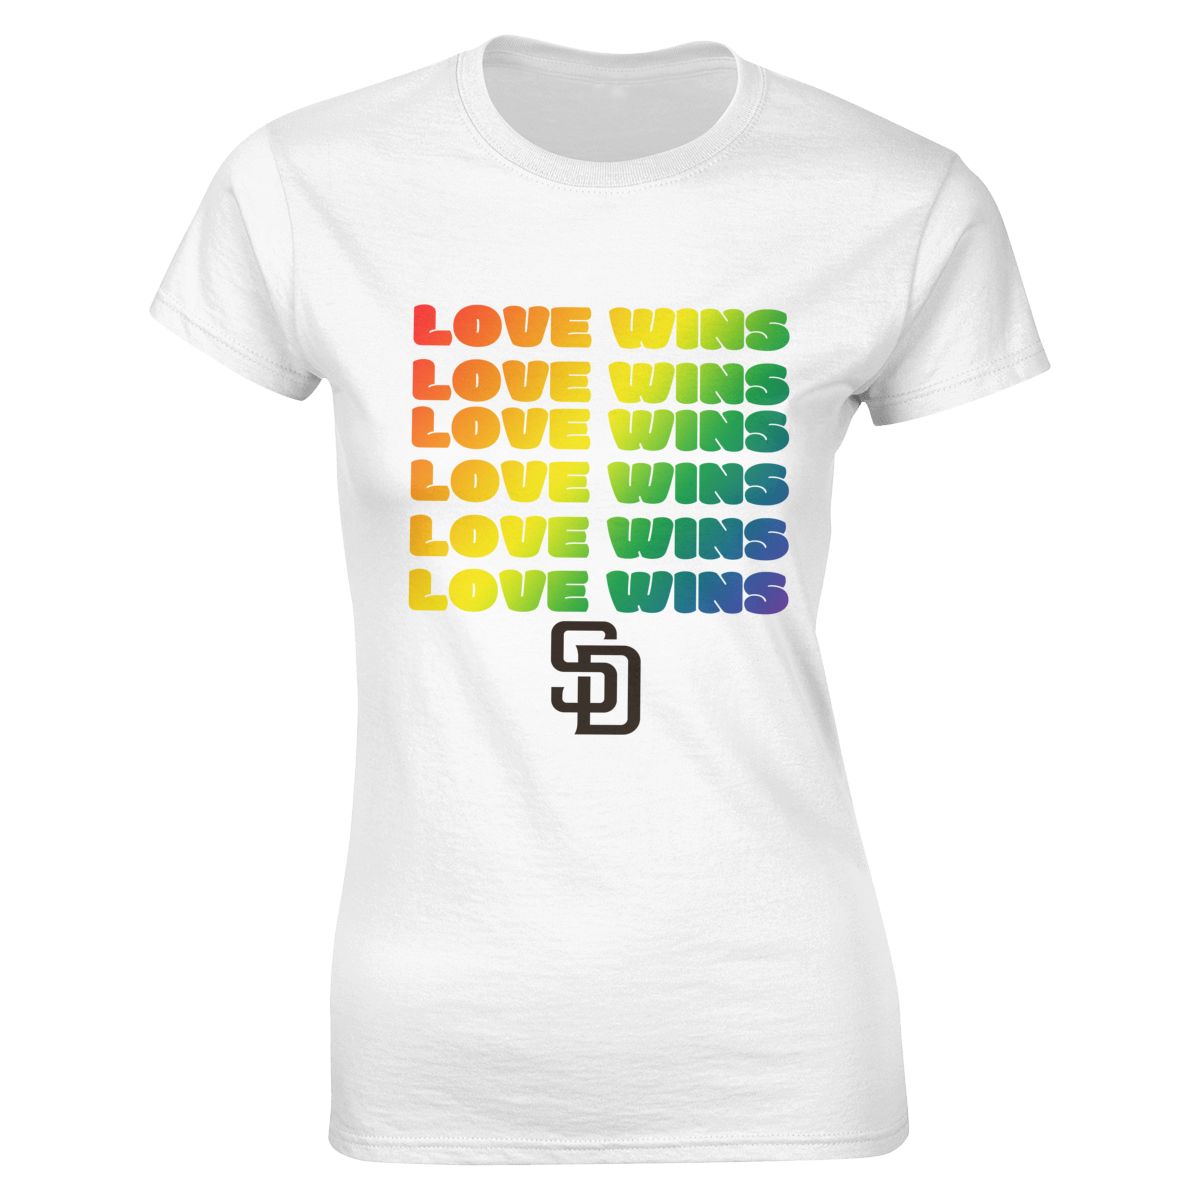 San Diego Padres Love Wins Pride Women's Classic-Fit T-Shirt